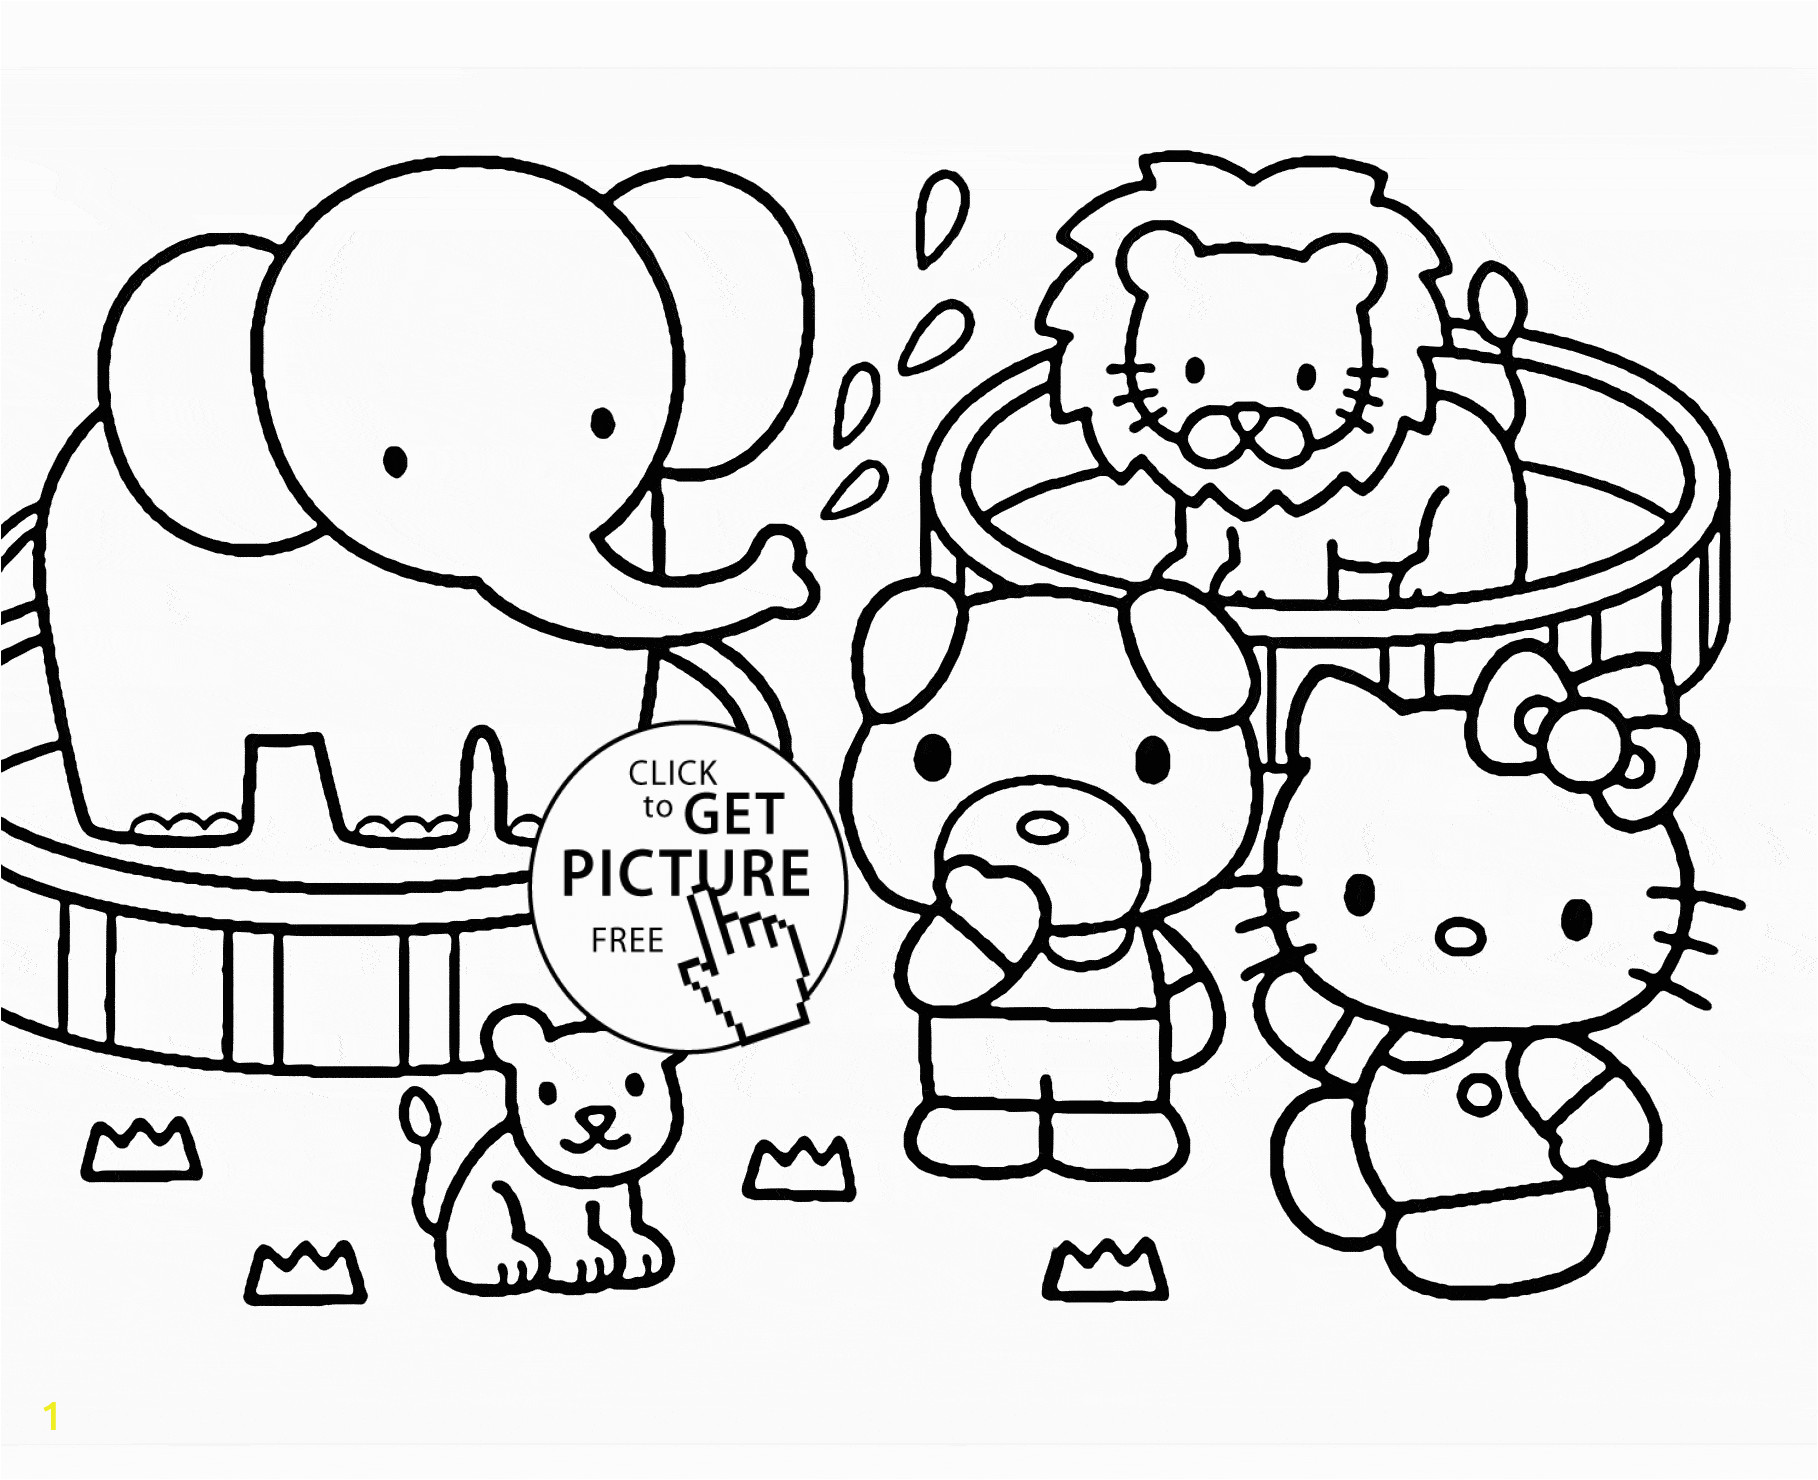 Stuffed Animal Coloring Pages Kitty at the Zoo Coloring Page for Kids for Girls Coloring